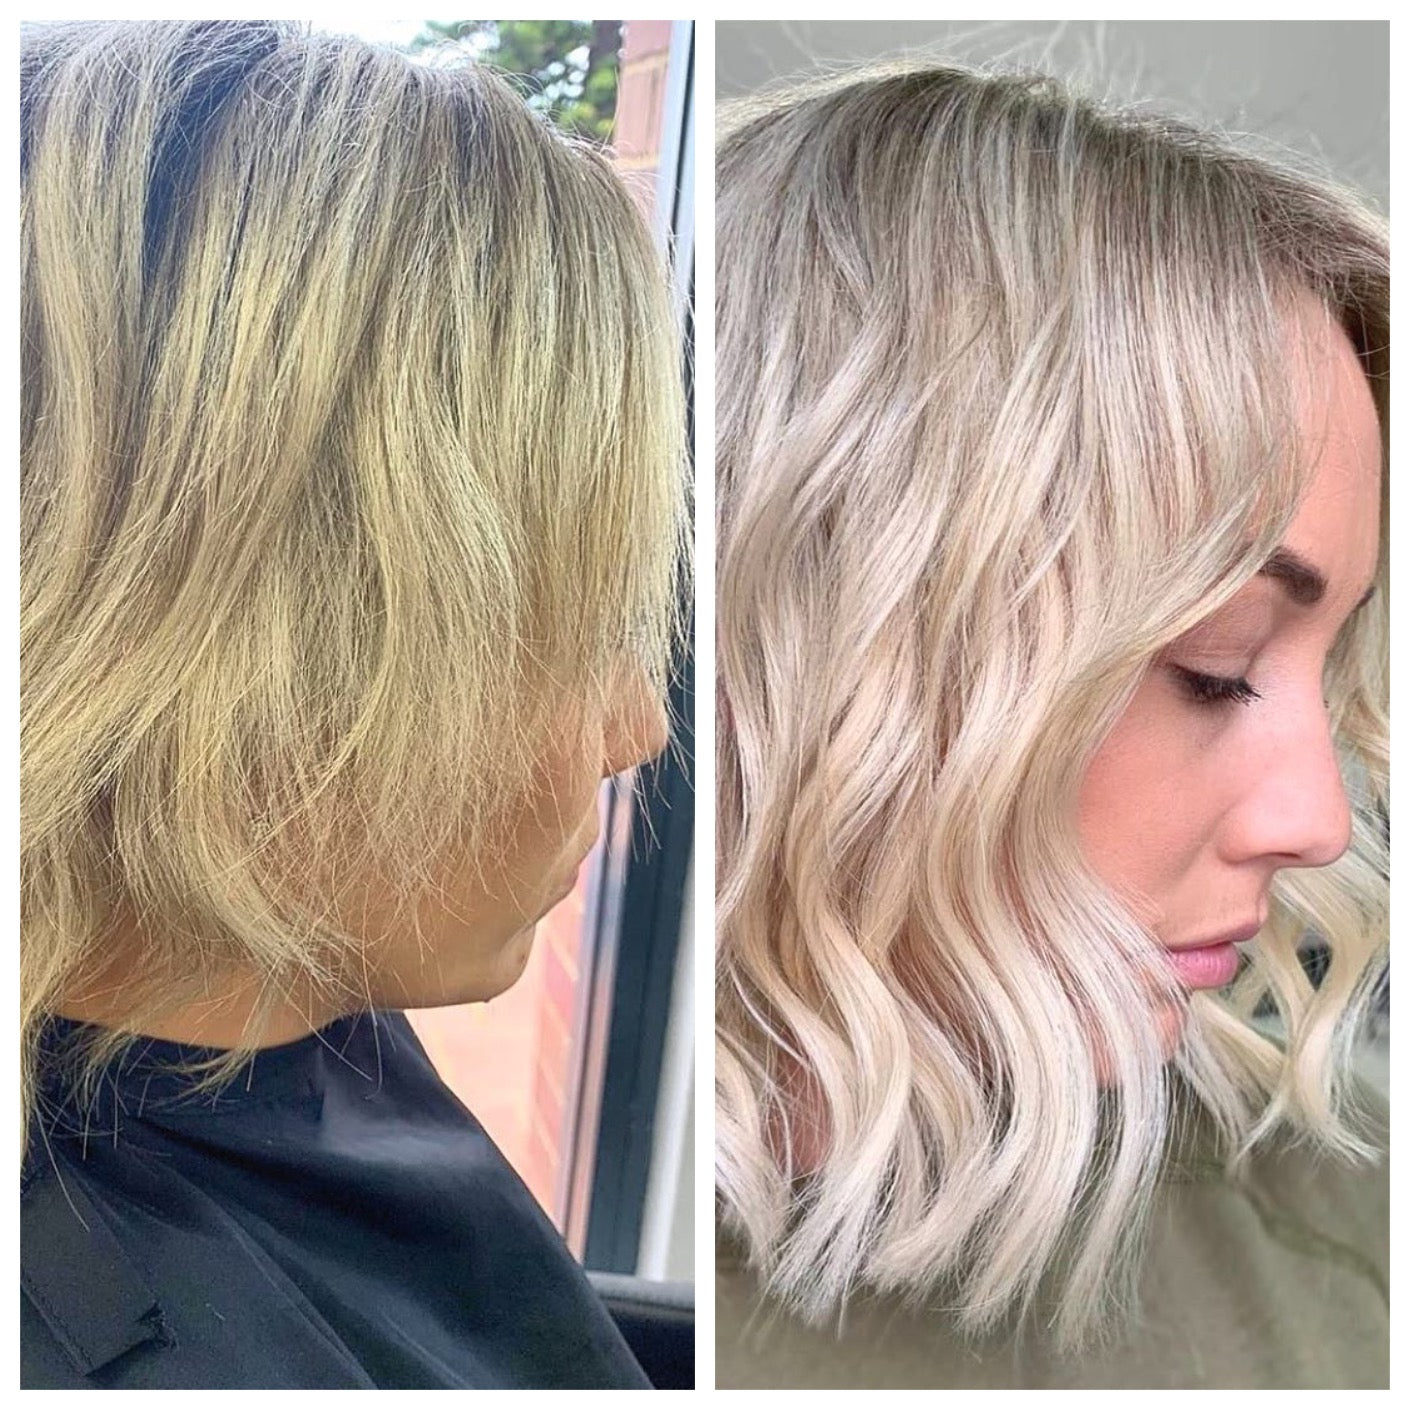 Jadore hair before and after - real model image